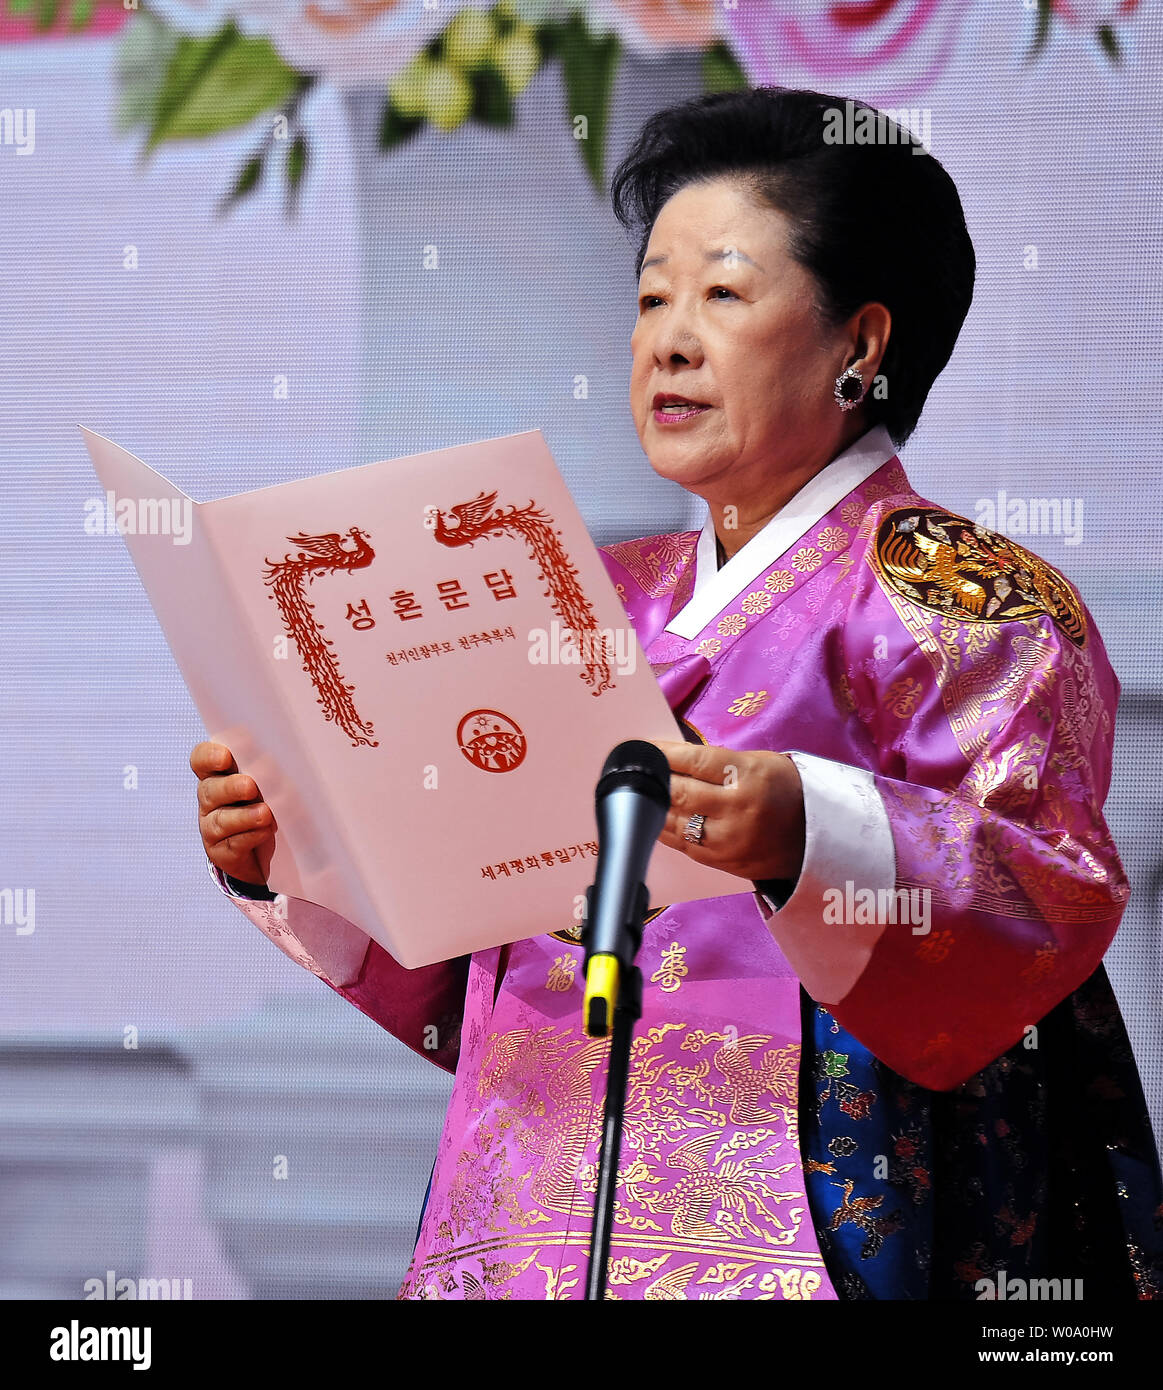 Hak-Ja Han, wife of late Unification Church founder Sun Myung Moon attends a Blessing Ceremony of the Family Federation for World Peace and Unification at the CheongShim Peace World Center in Gapyeong, South Korea, on February 20, 2016.     Photo by keizo Mori Stock Photo